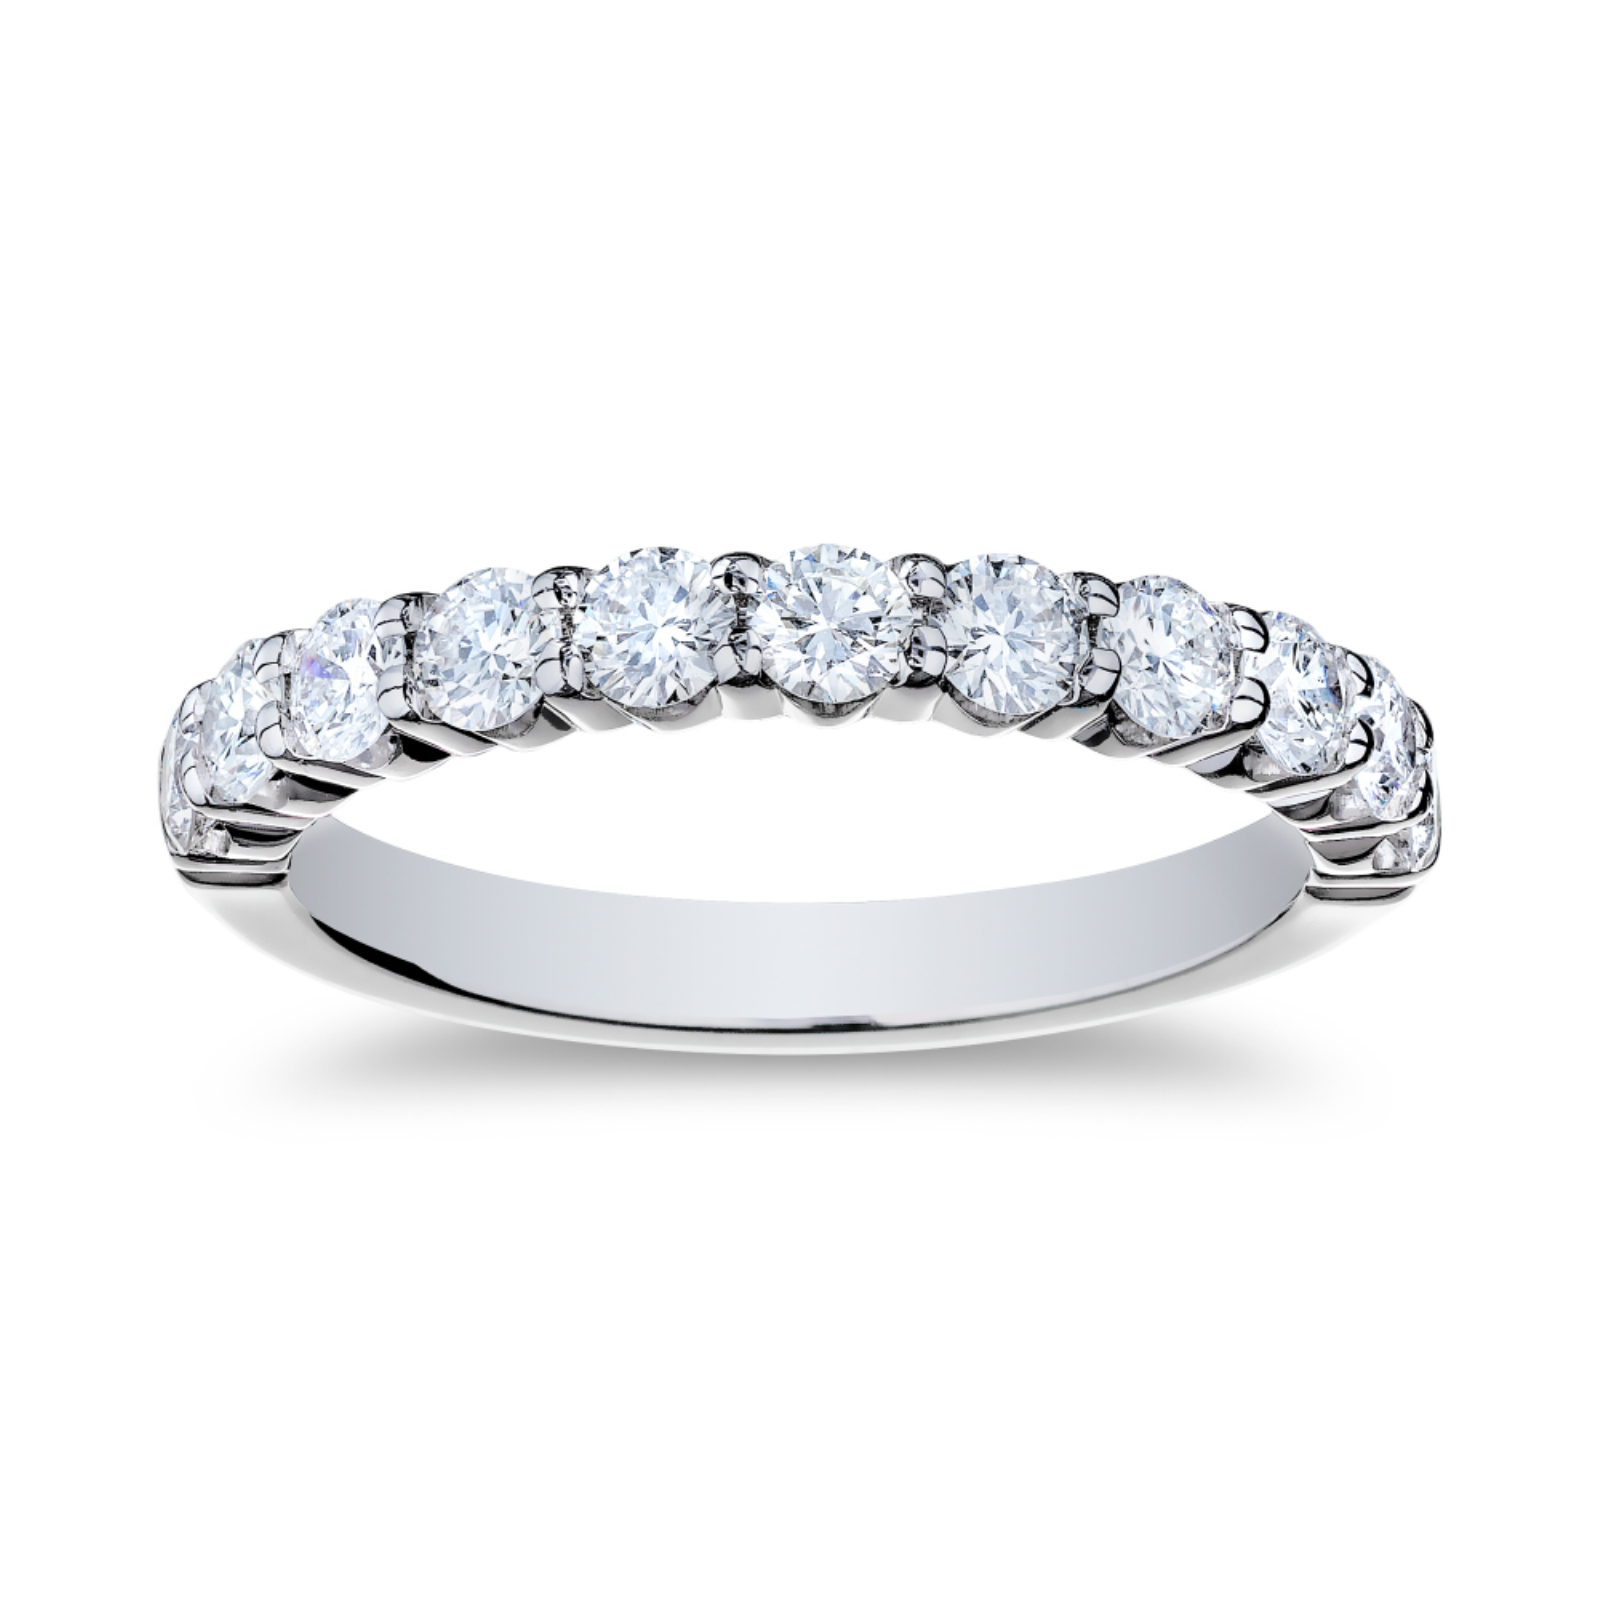 White Gold and Diamond Halfway Eternity Band